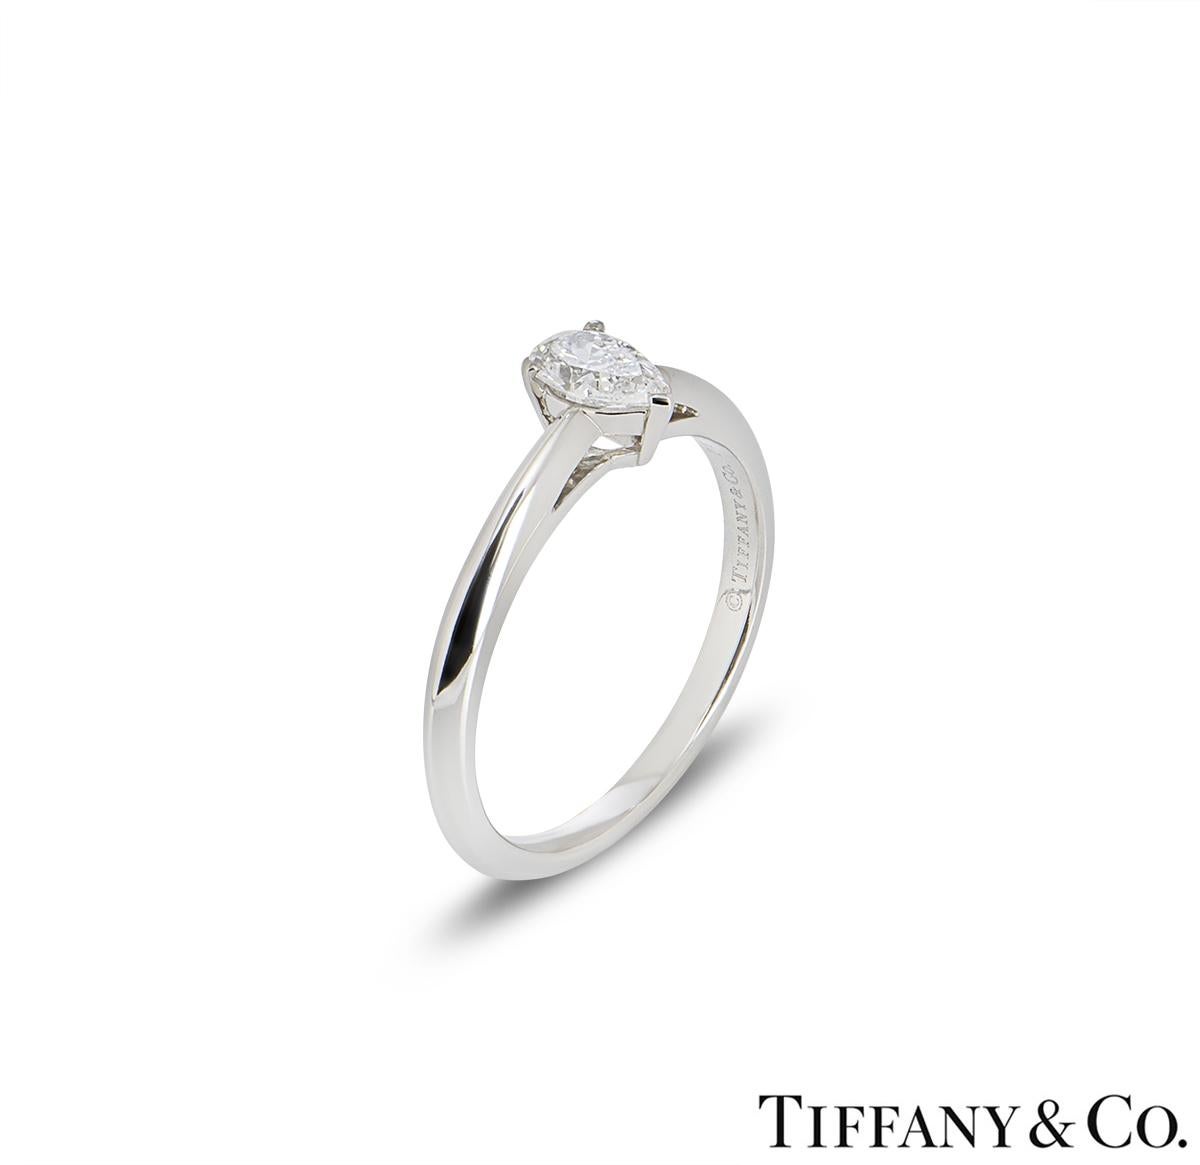 A beautiful platinum diamond ring by Tiffany & Co. The ring comprises of a pear cut diamond in a 3 claw setting with a weight of 0.41ct, E colour and VVS1 clarity. The ring is a size UK N½ - EU 53 - US 7 but can be adjusted for a perfect fit and has